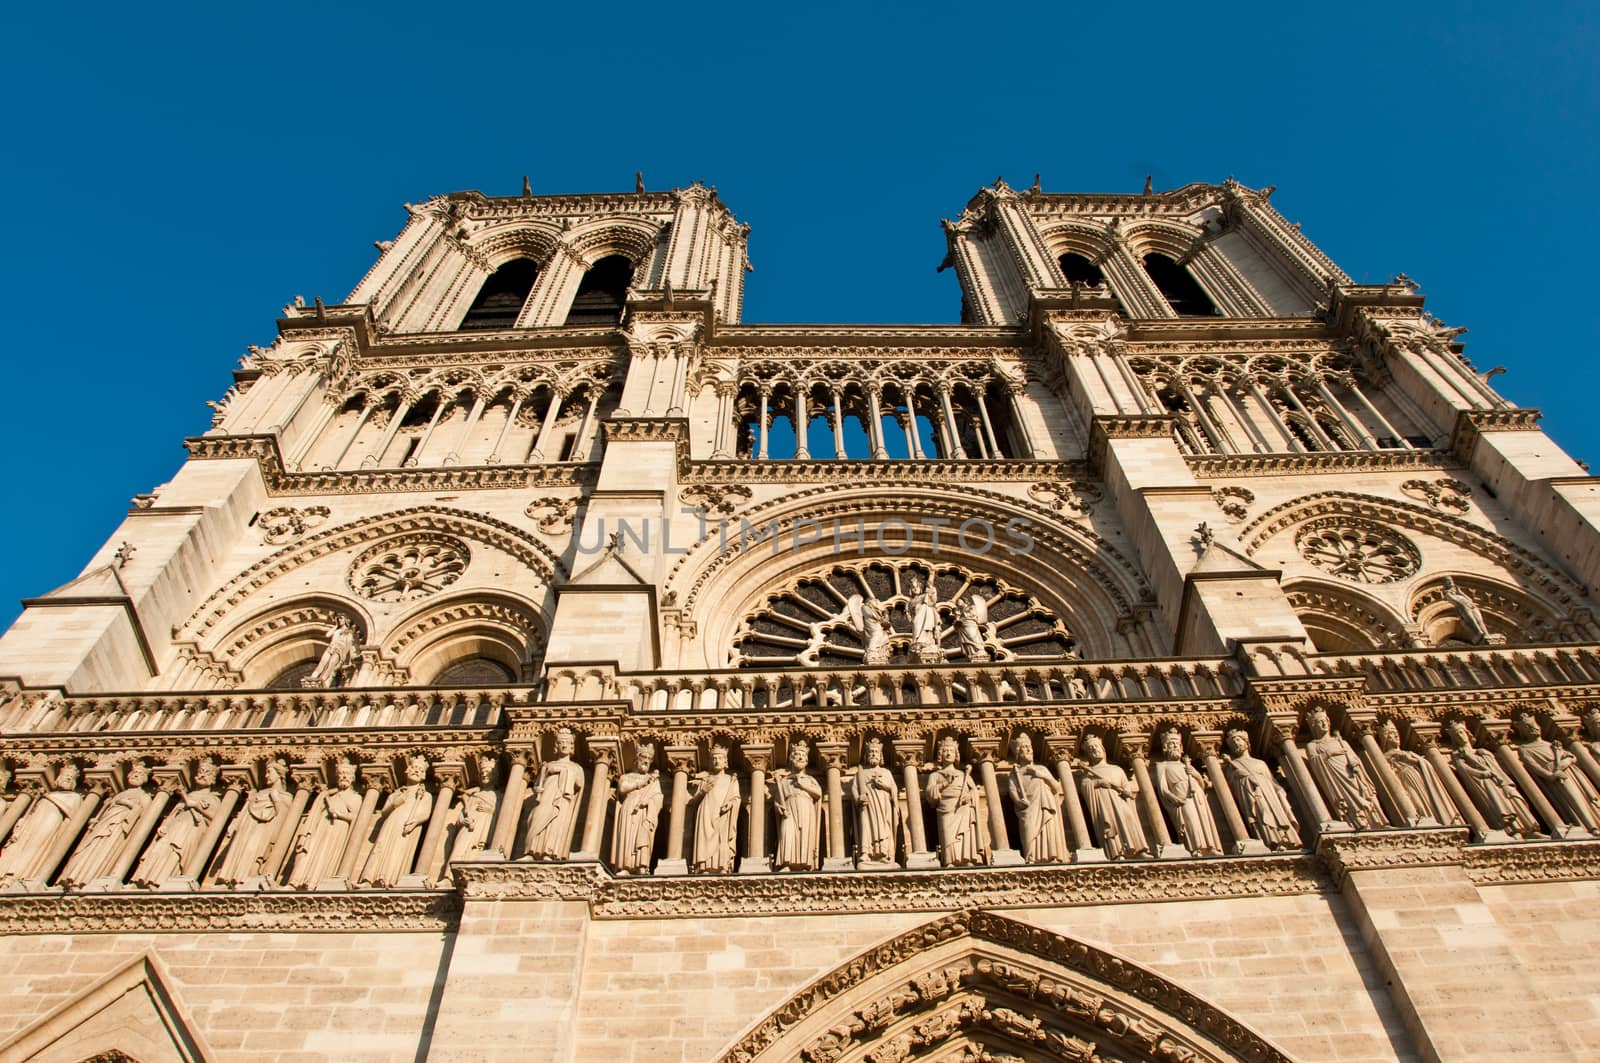 Notre-Dame of Paris cathedral